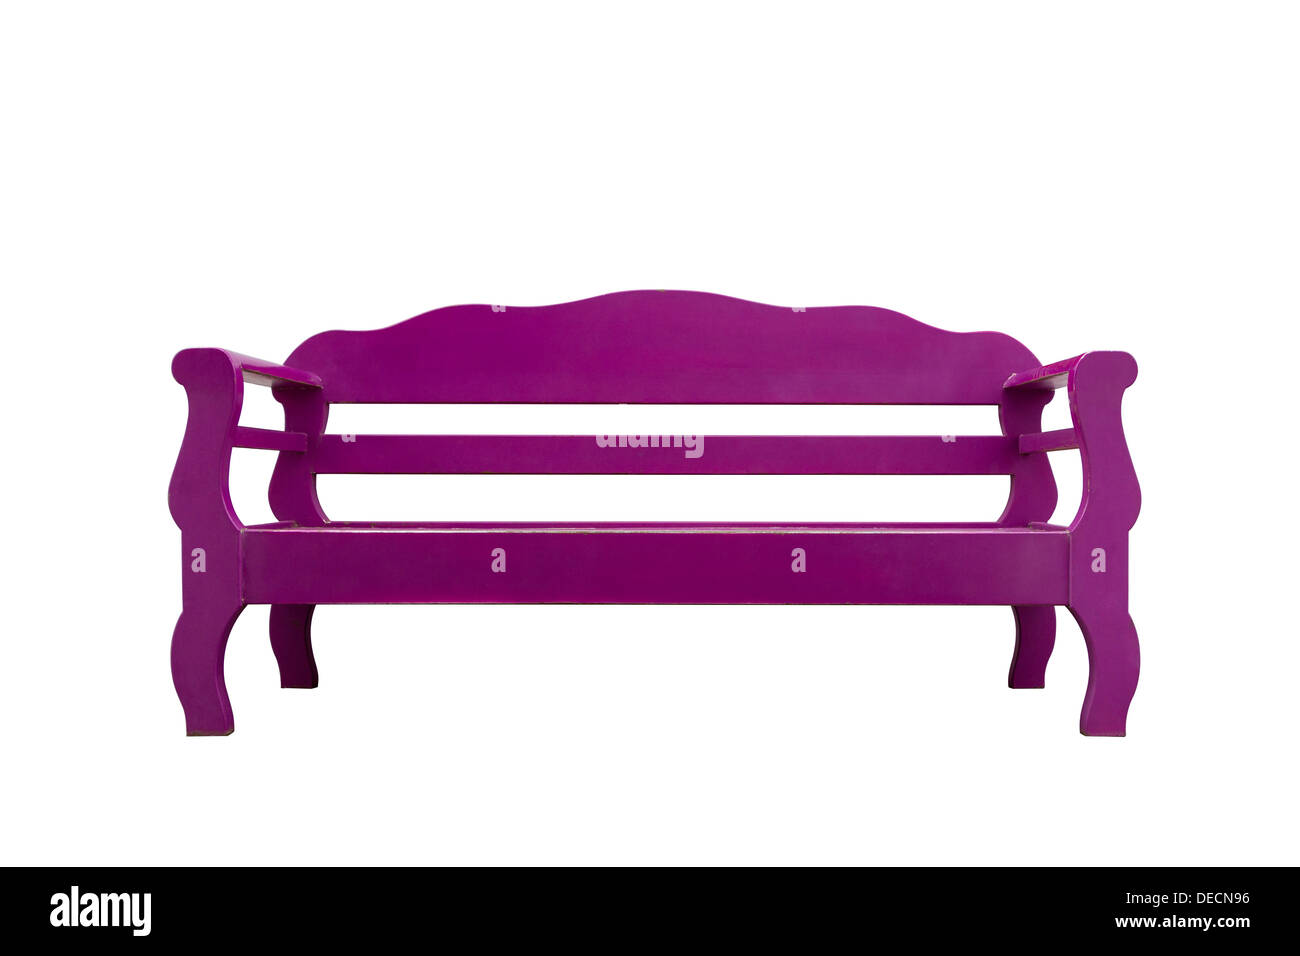 Purple wooden bench isolate on white background. Stock Photo